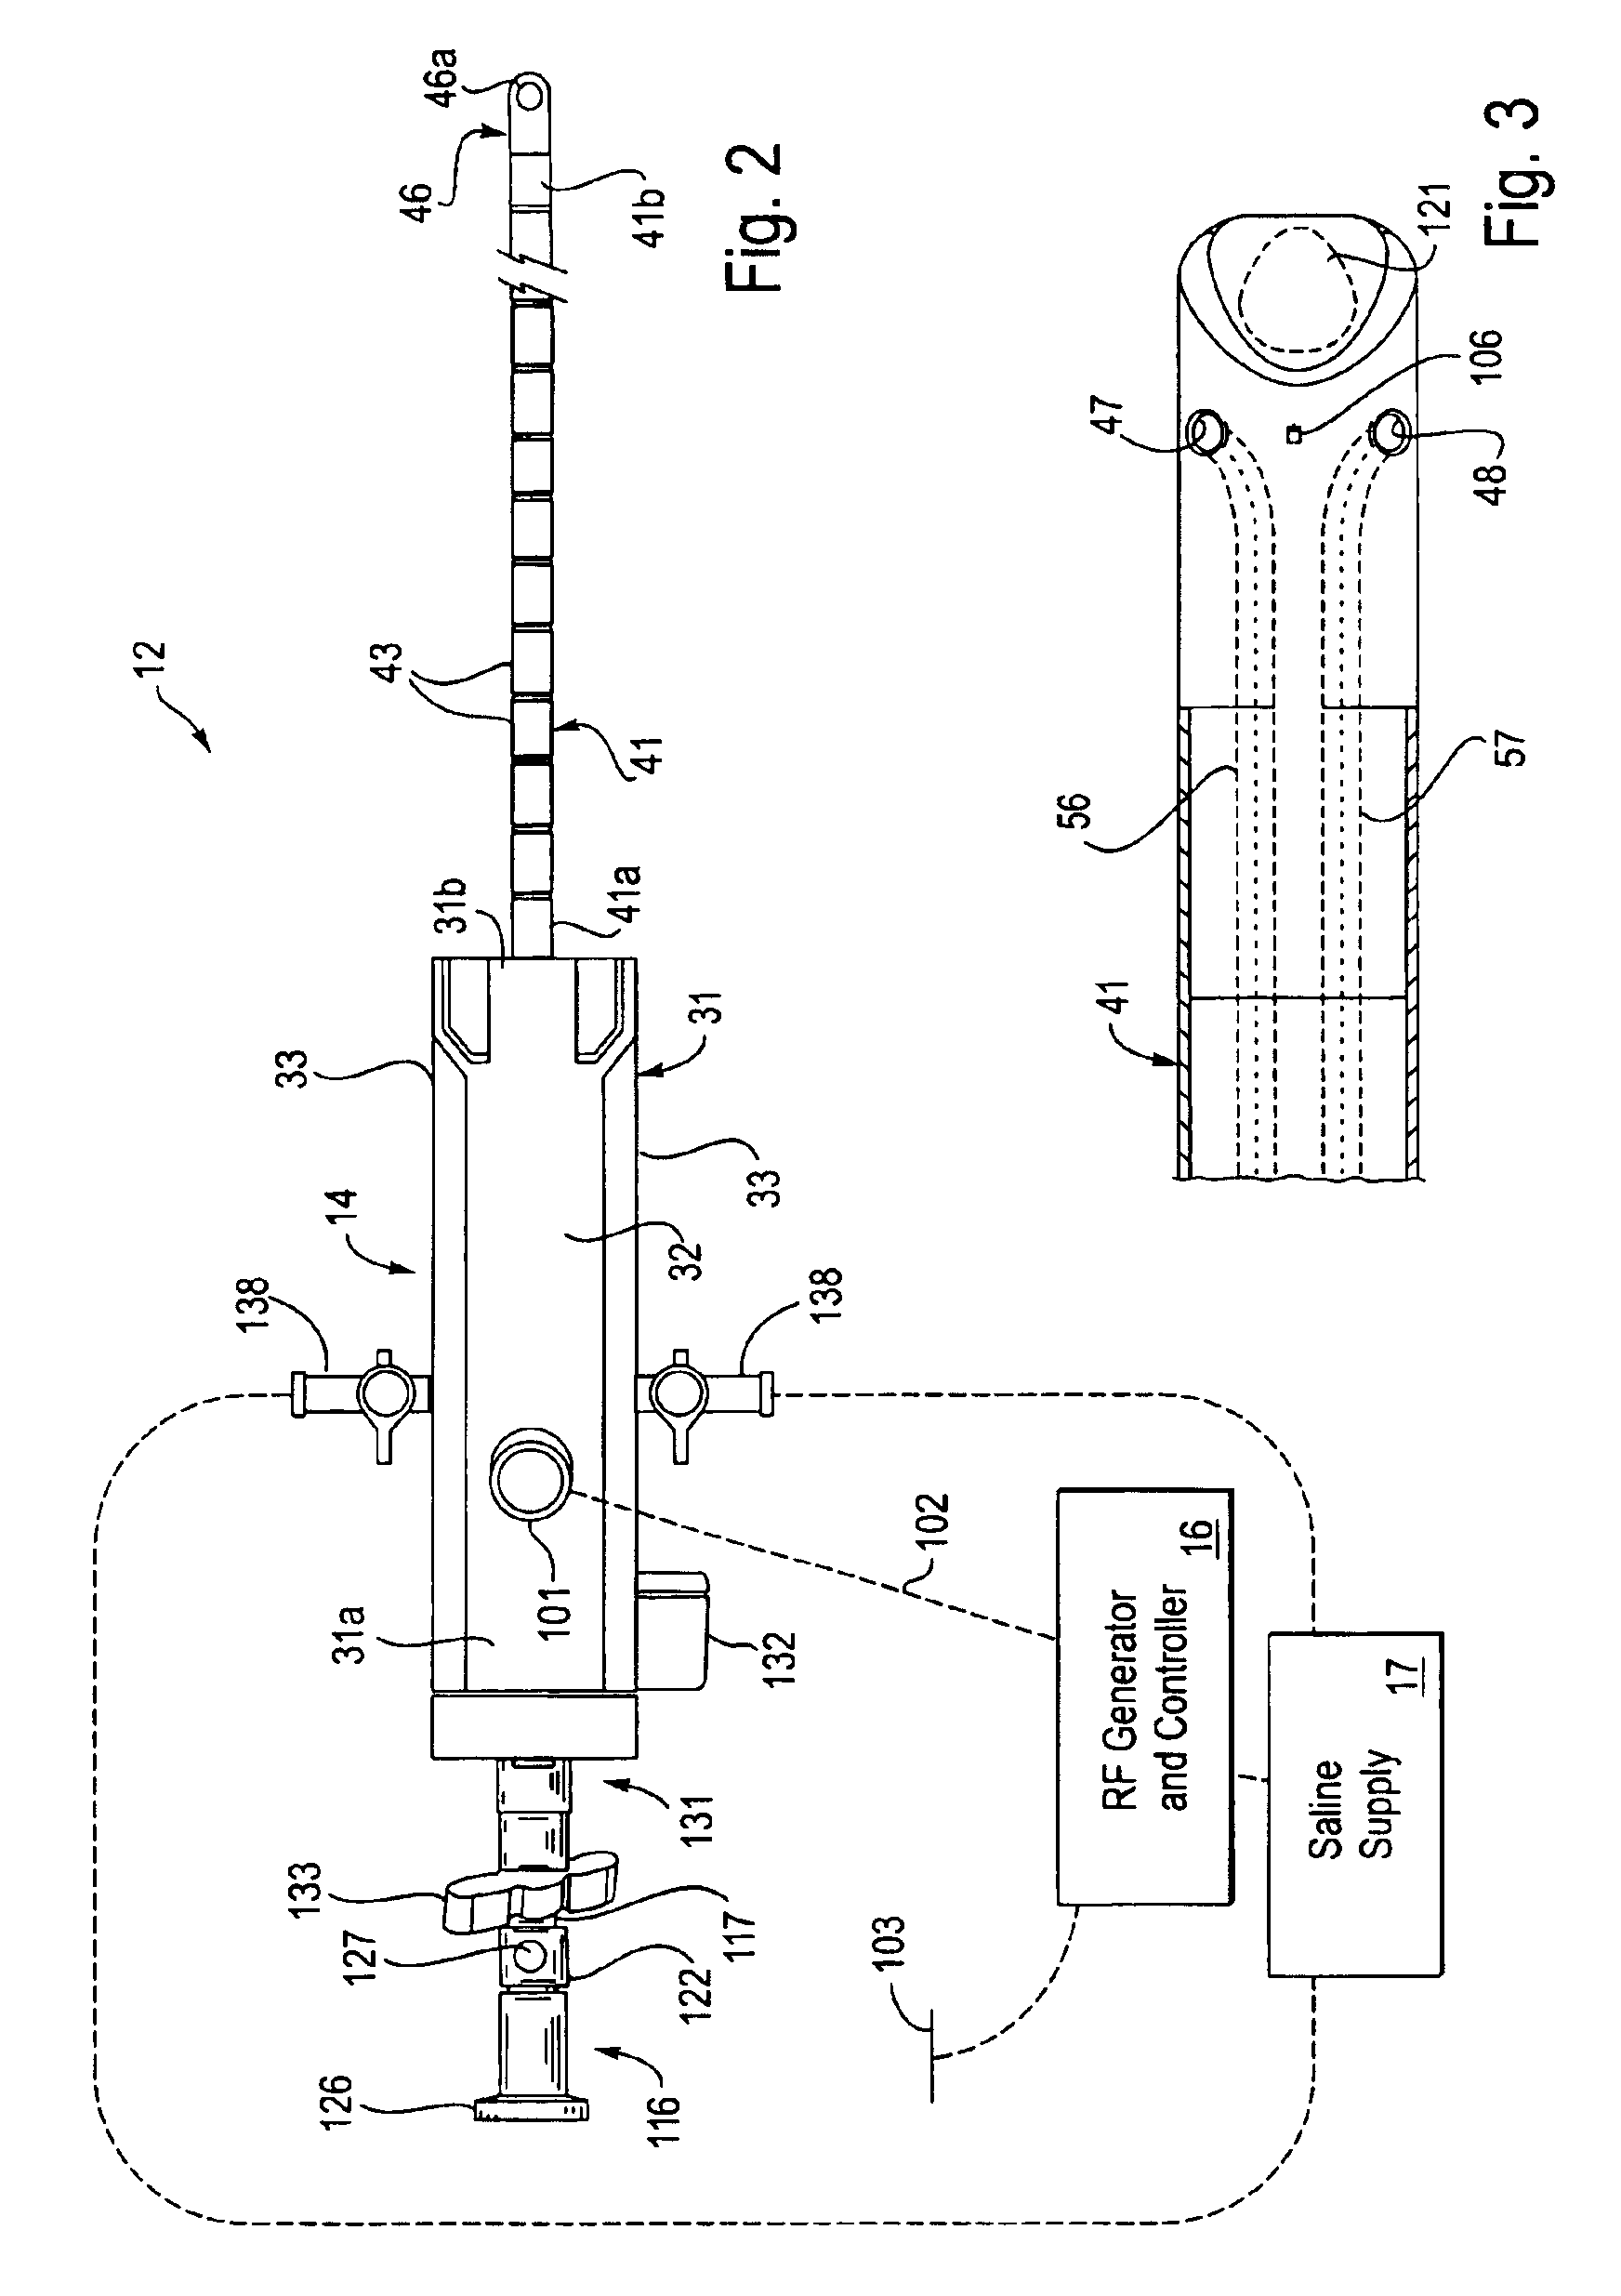 Method for monitoring impedance to control power and apparatus utilizing same